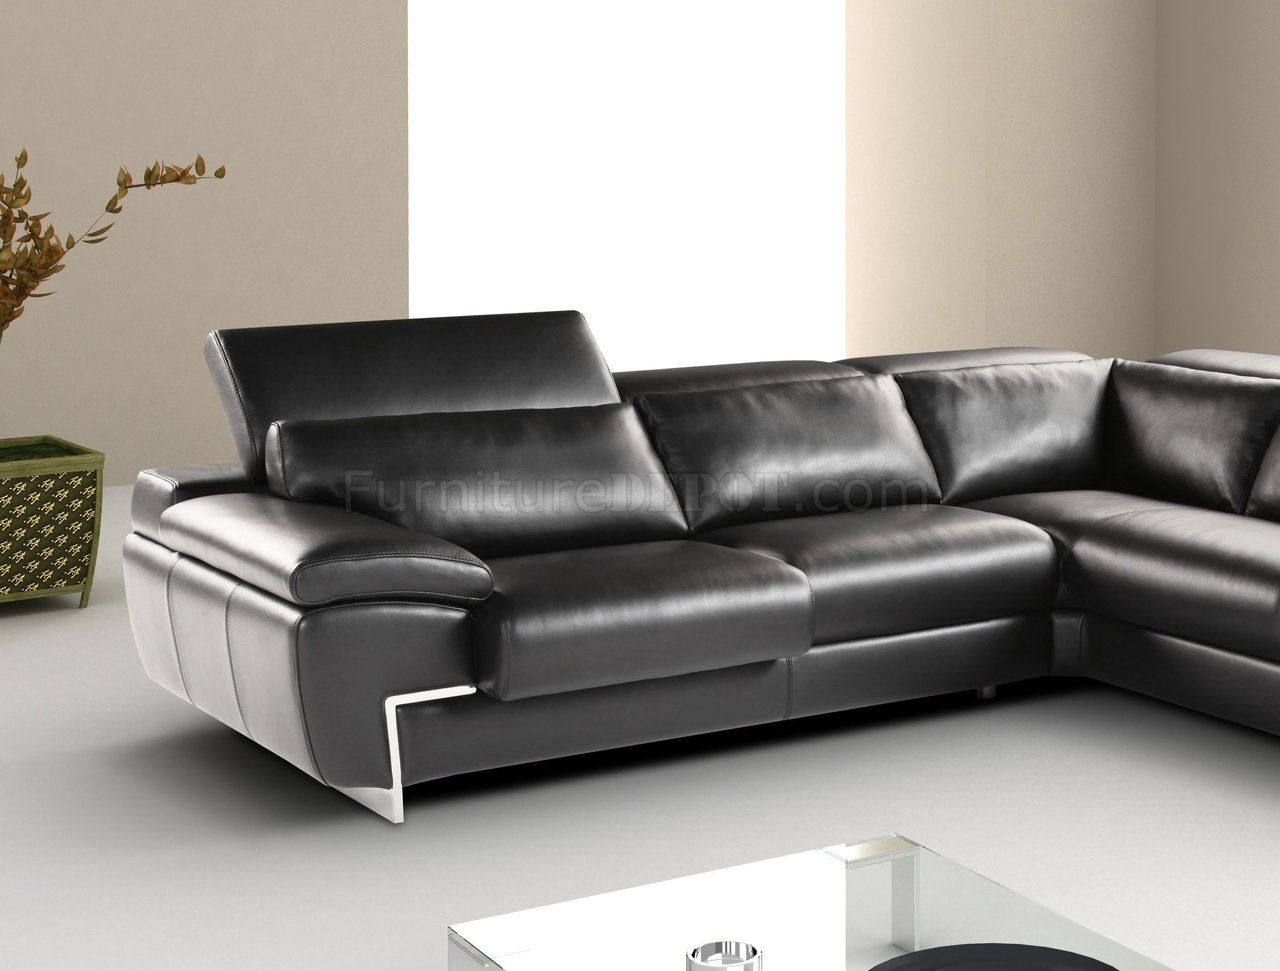 Black Full Leather Modern Sectional Sofa W/adjustable Headrest With Wynne Contemporary Sectional Sofas Black (View 6 of 15)